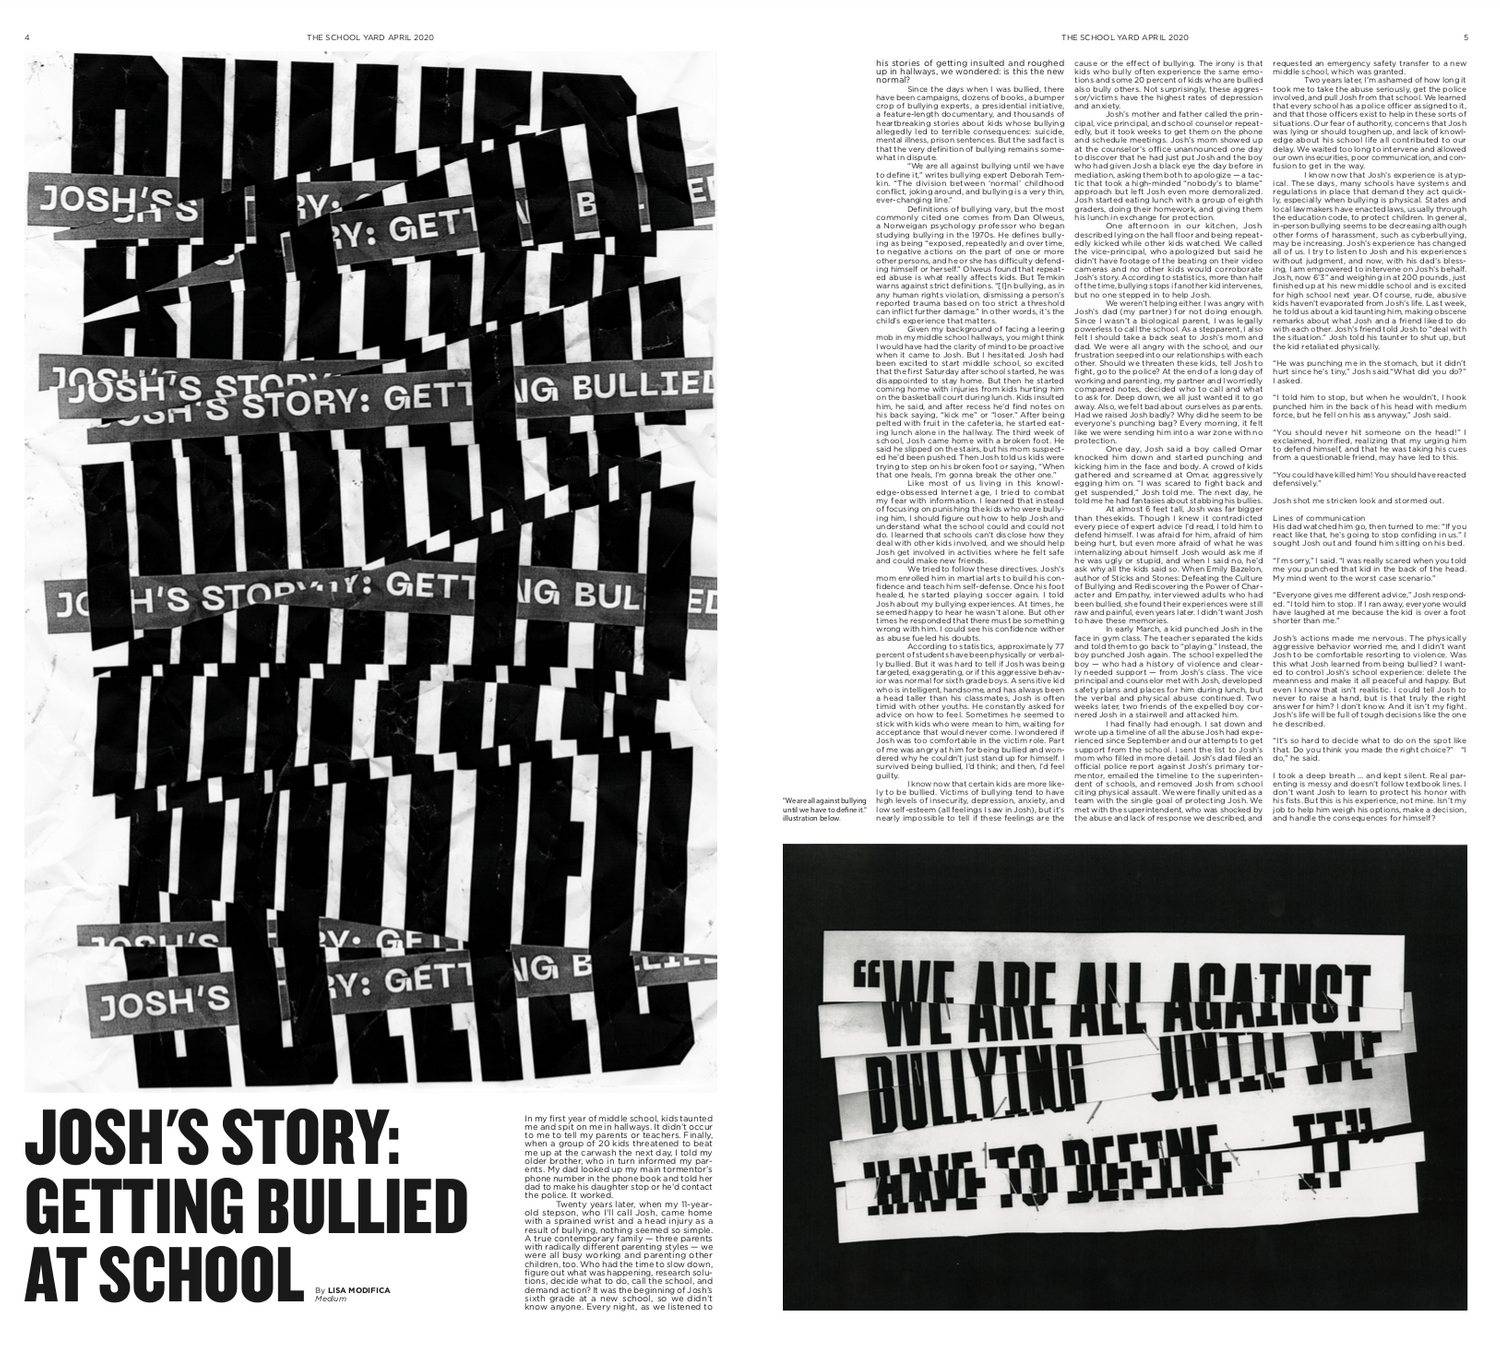 An opened newspaper with articles and some pictures showing some shredded paper with text. The title of the article: Josh's Story Getting Bullied At School.